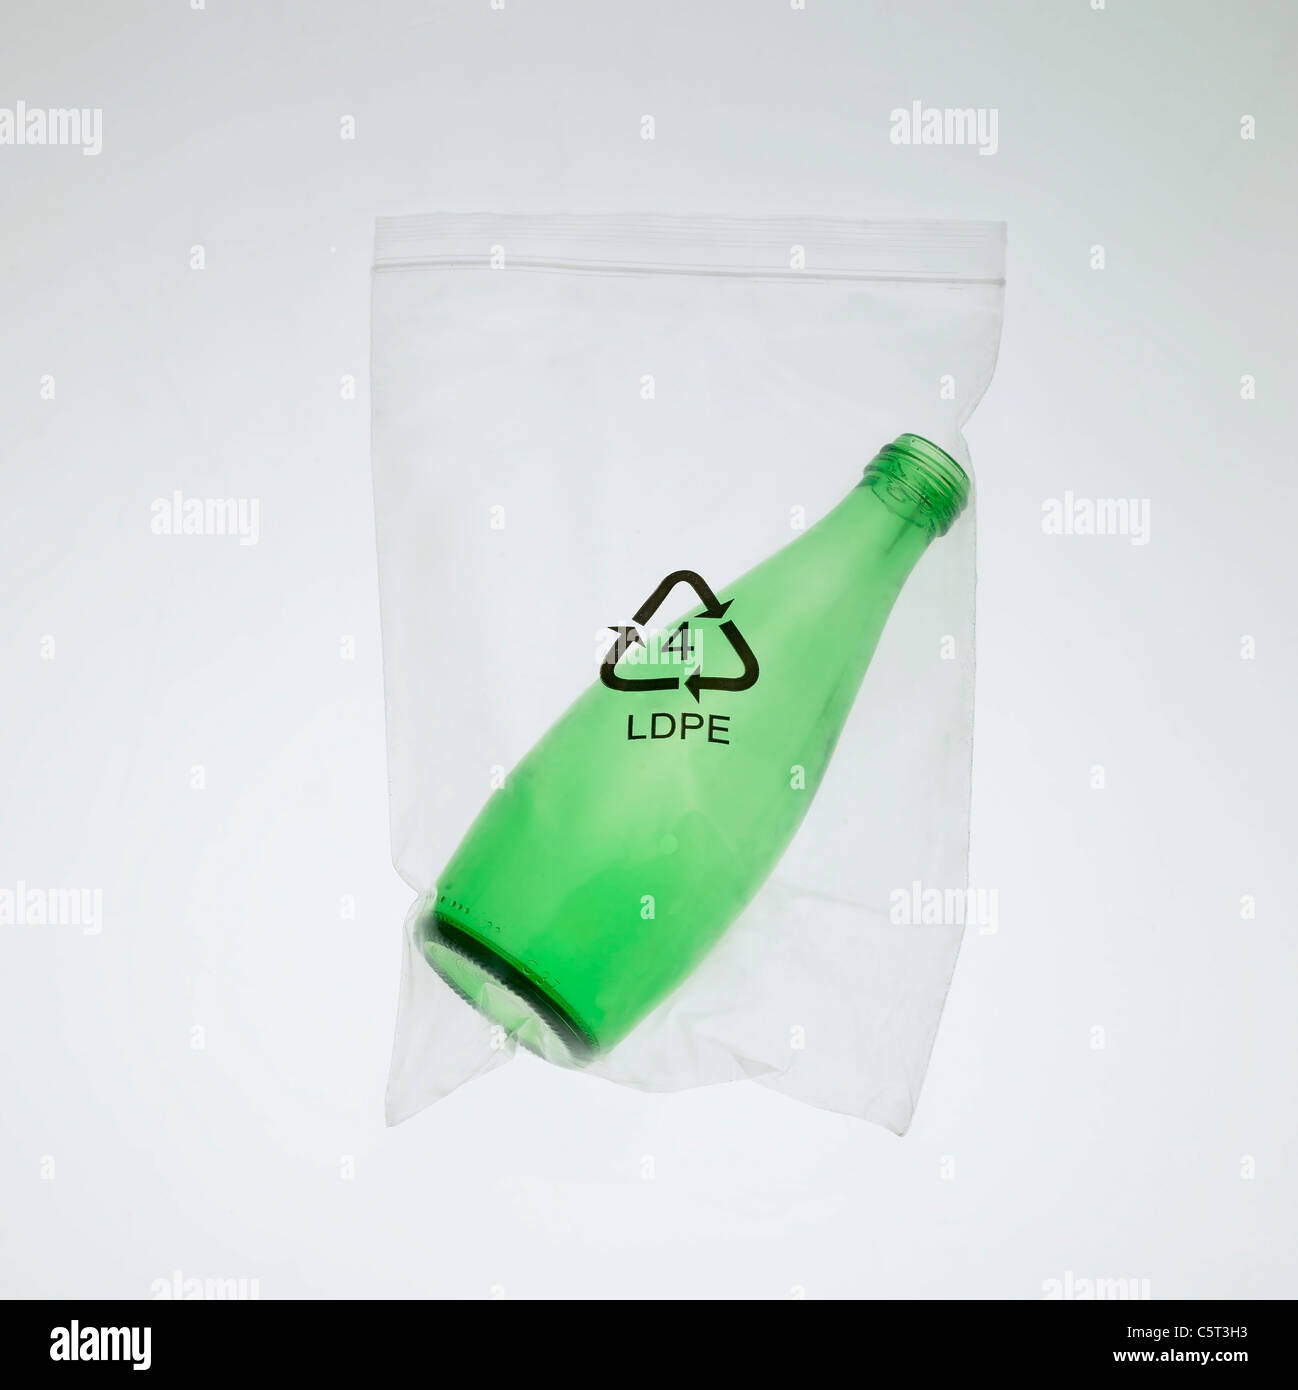 Glass bottle in a plastic bag Stock Photo